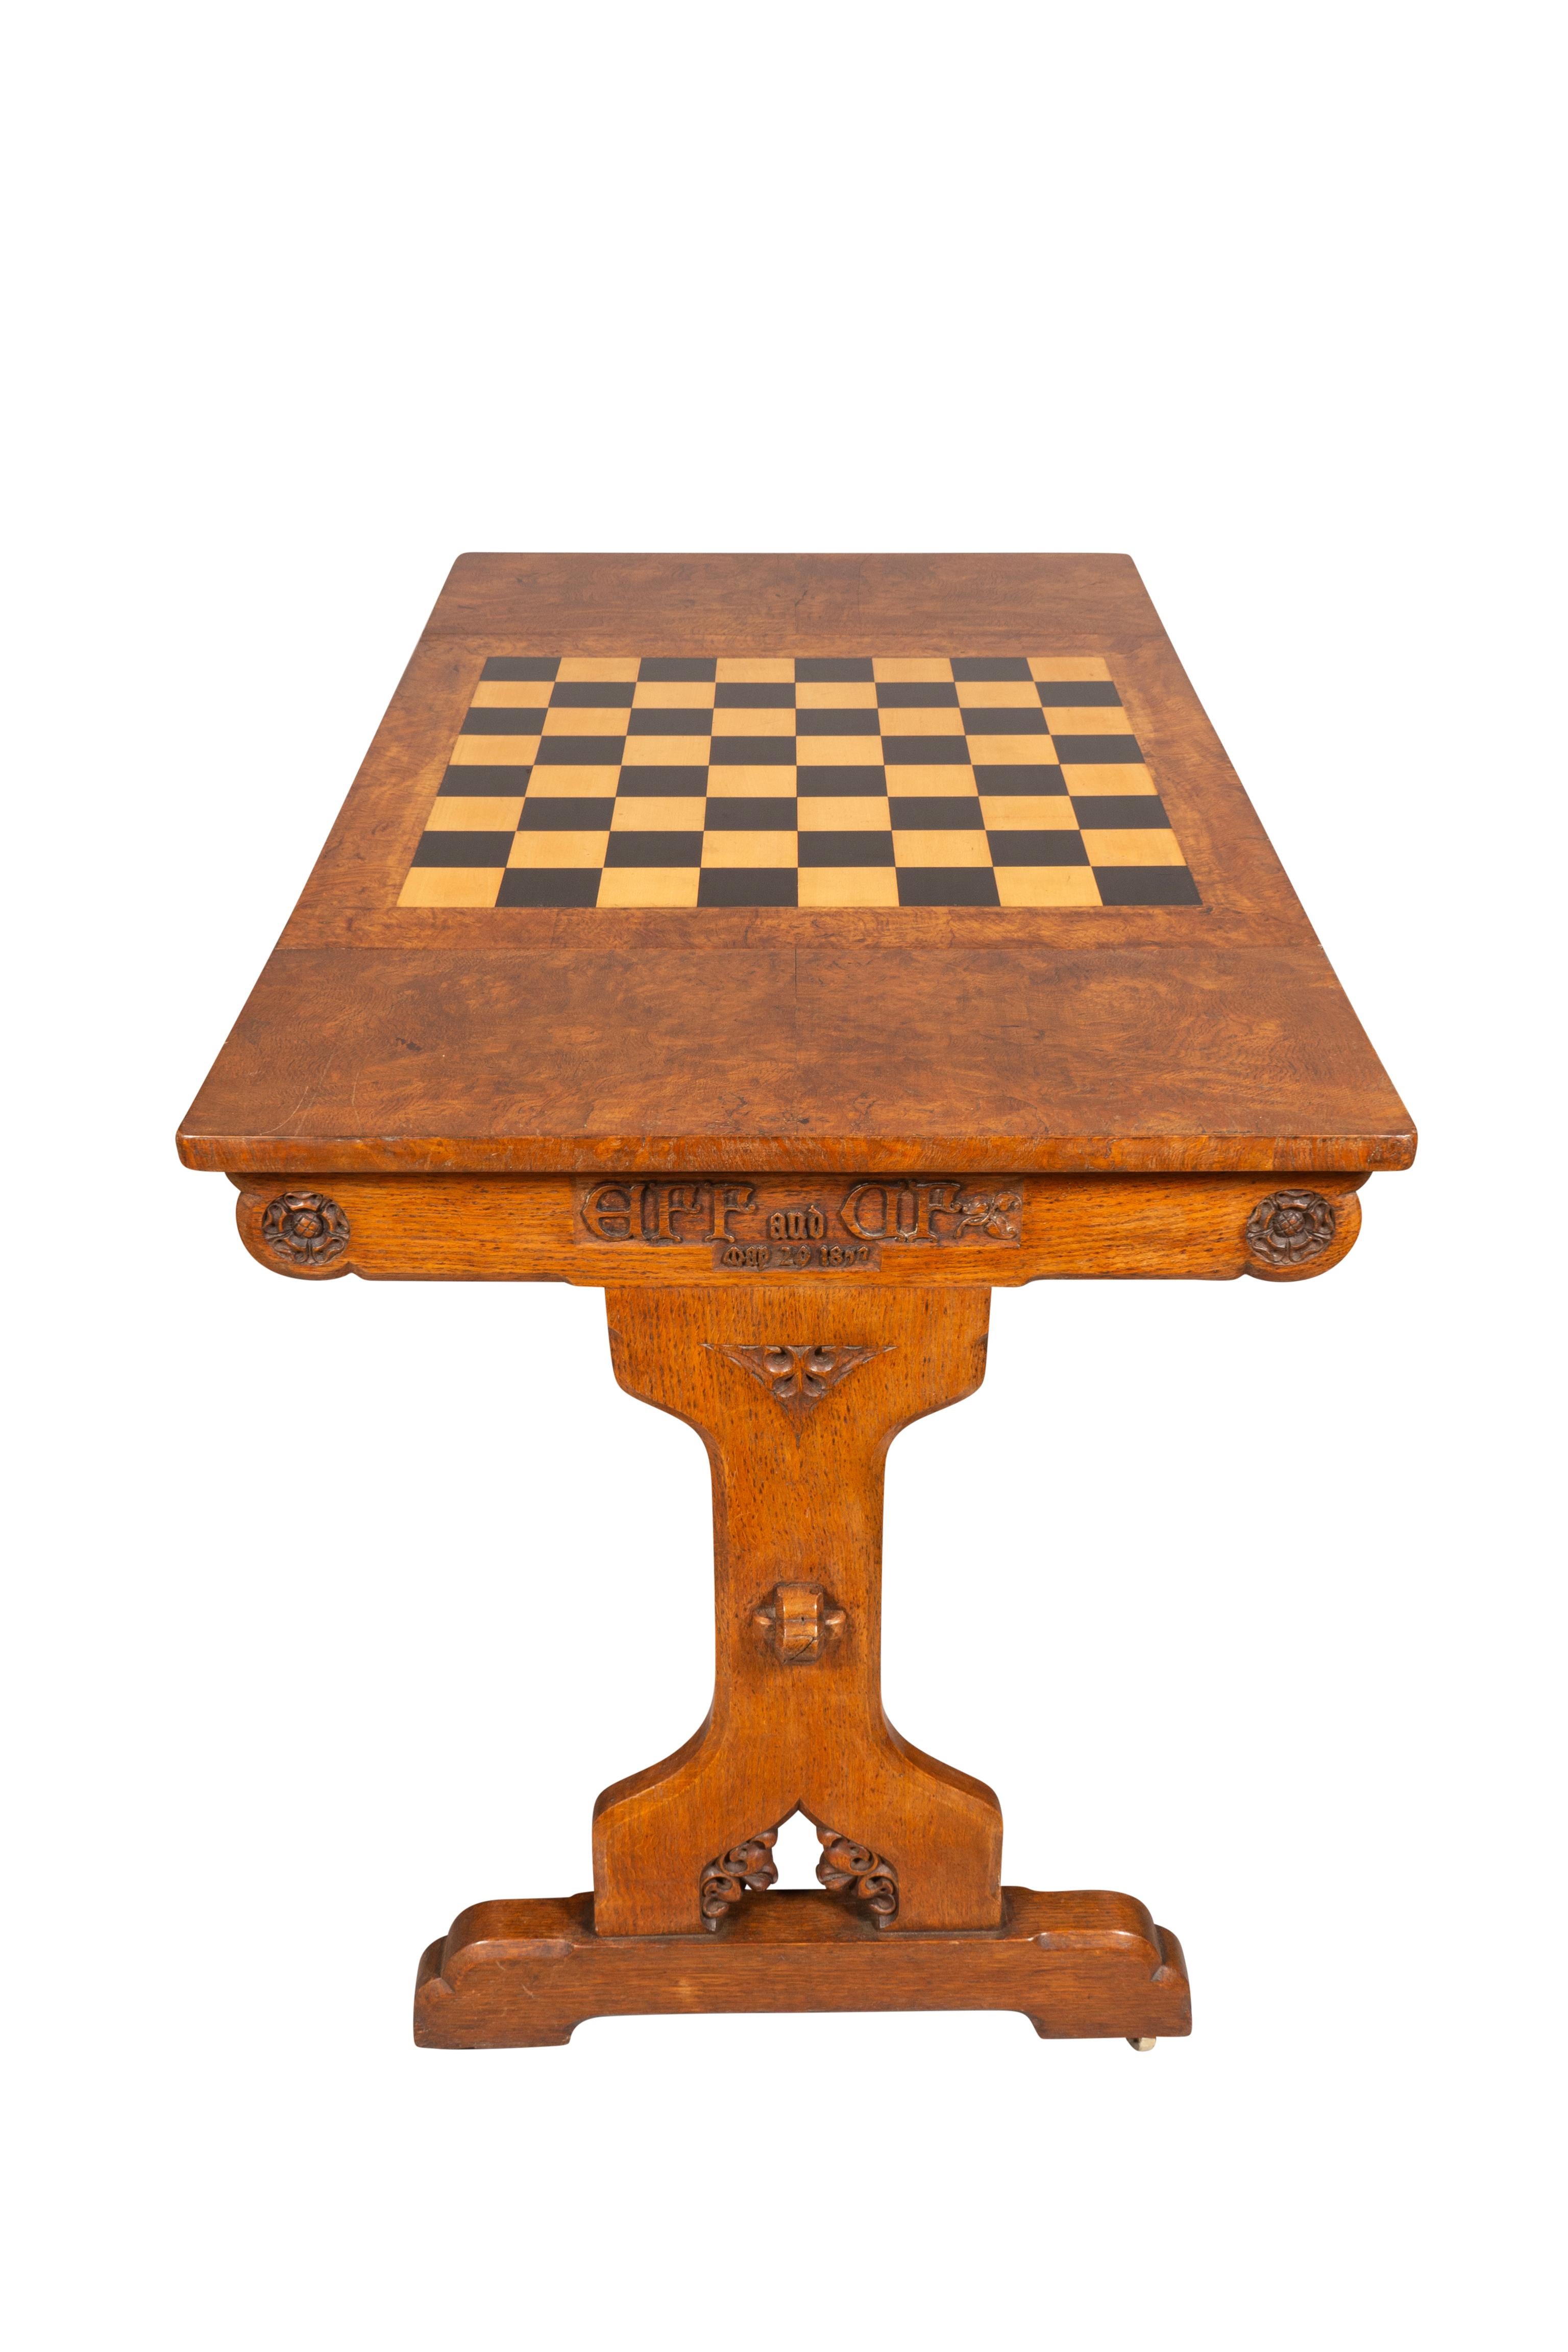 Ebony Victorian Gothic Revival Pollard Oak Games Table Attributed To Pugin For Sale